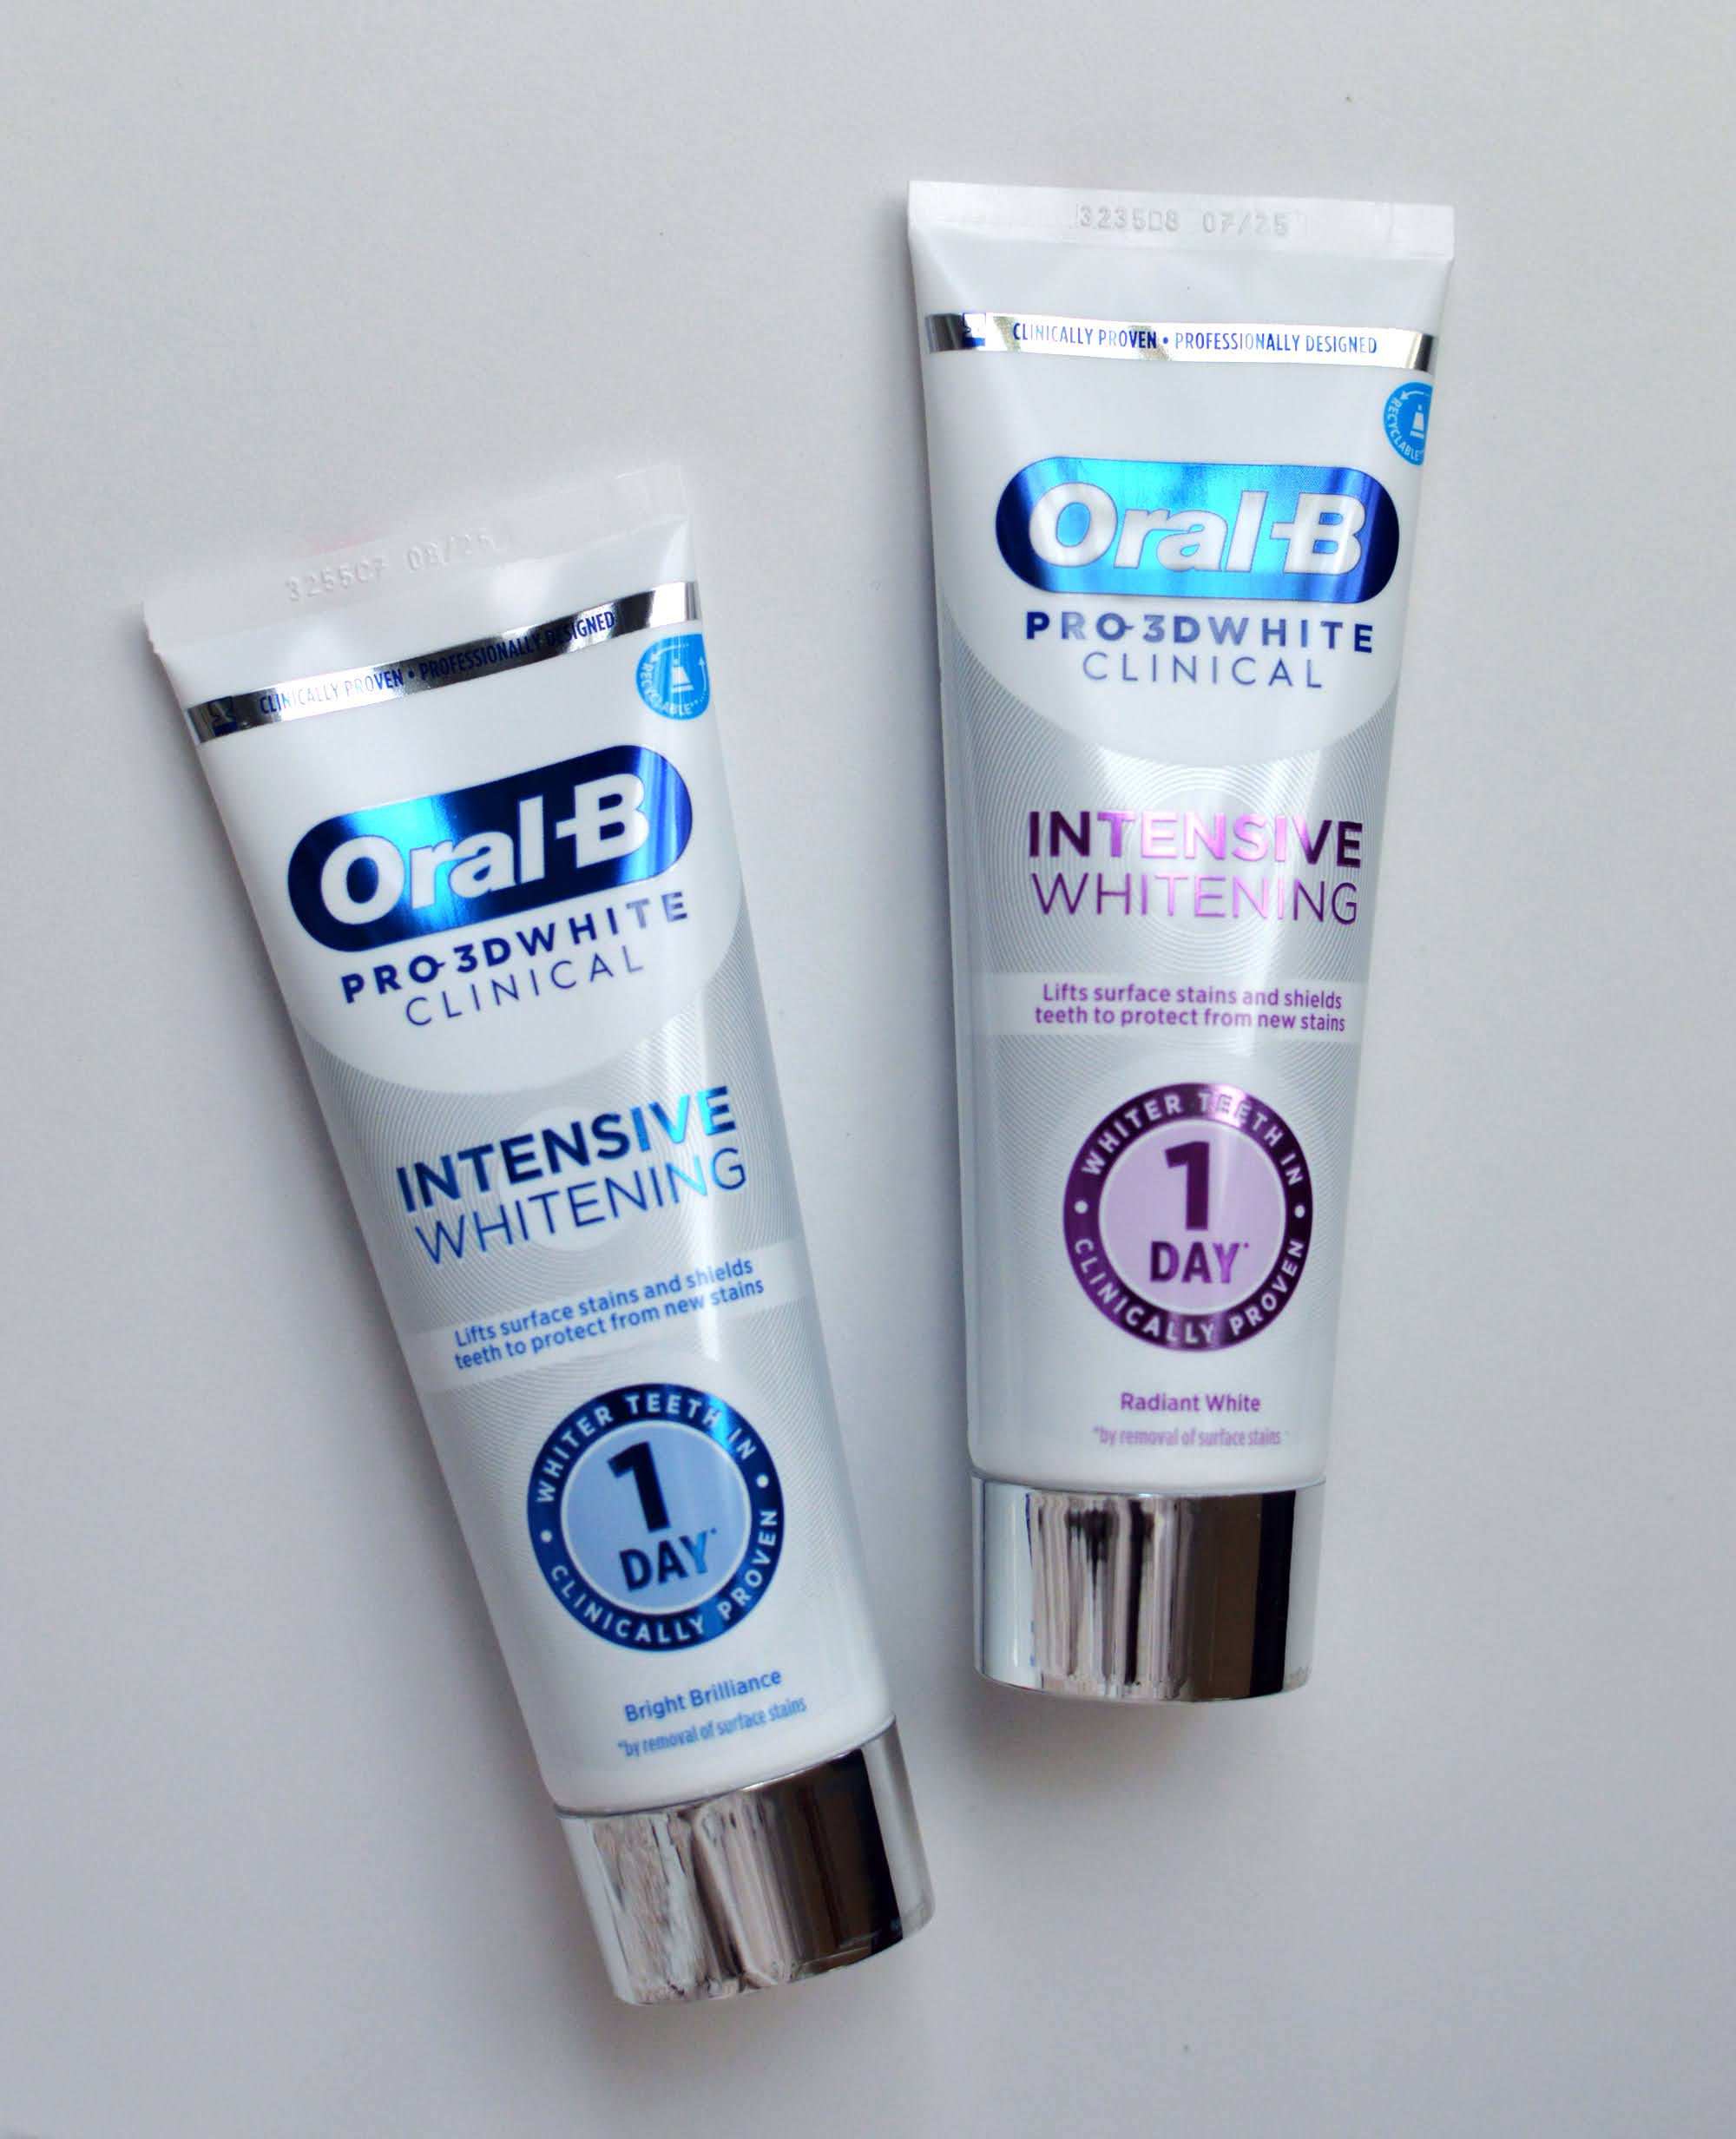 Oral-B Intensive Whitening Toothpaste